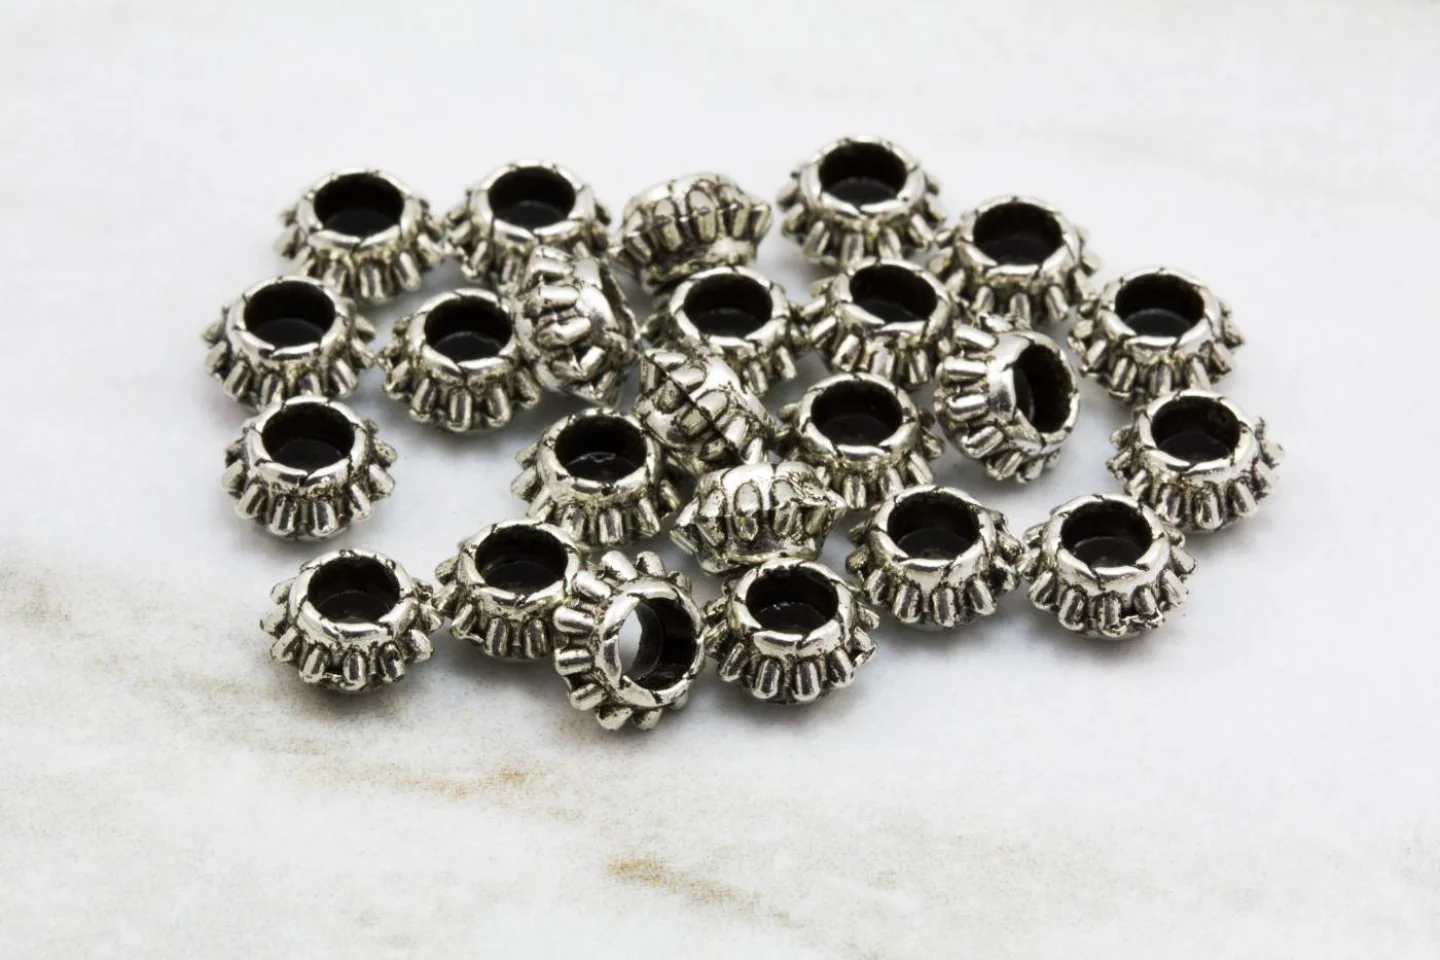 silver-rondelle-jewelry-bead-findings.